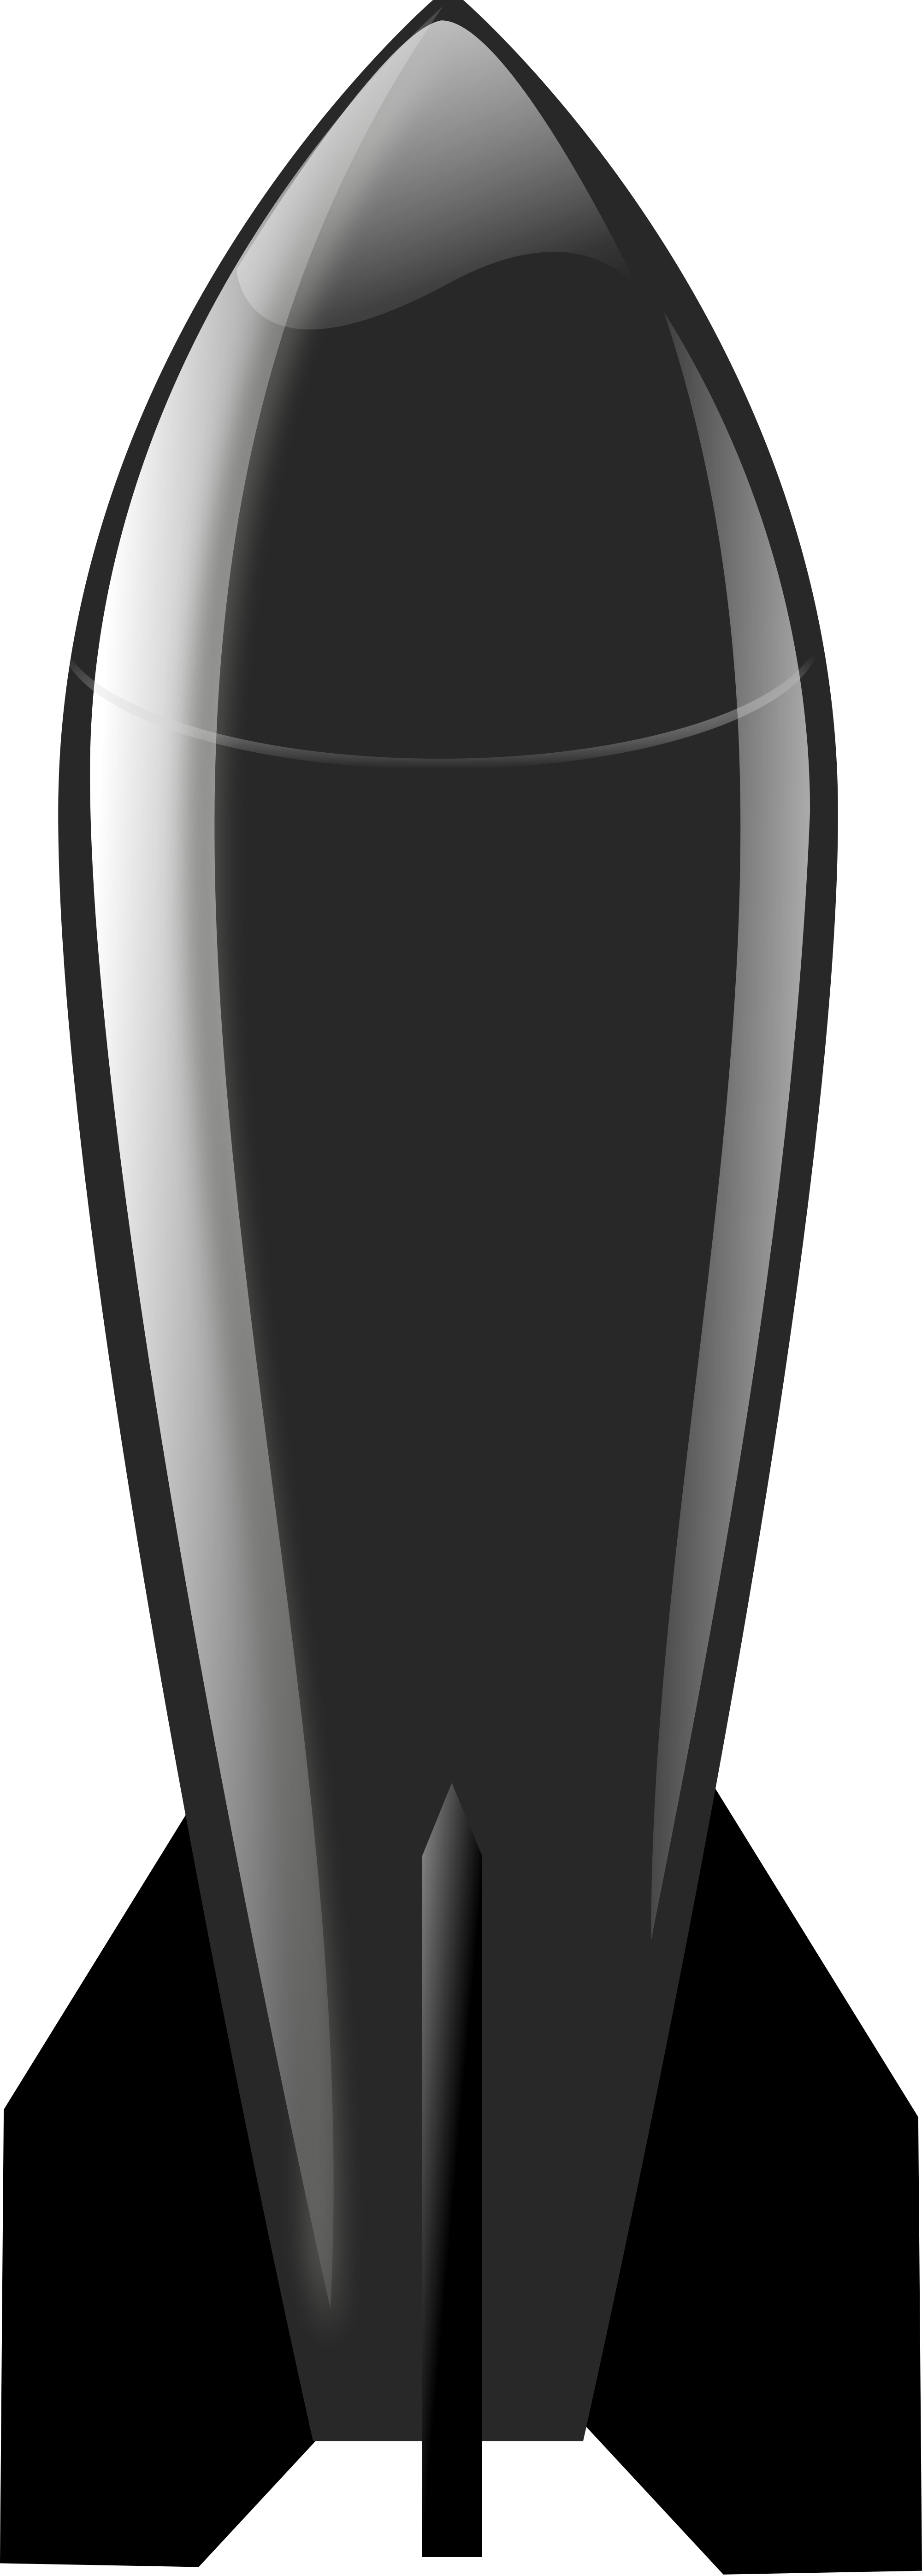 File dropped svg wikimedia. Bomb clipart air